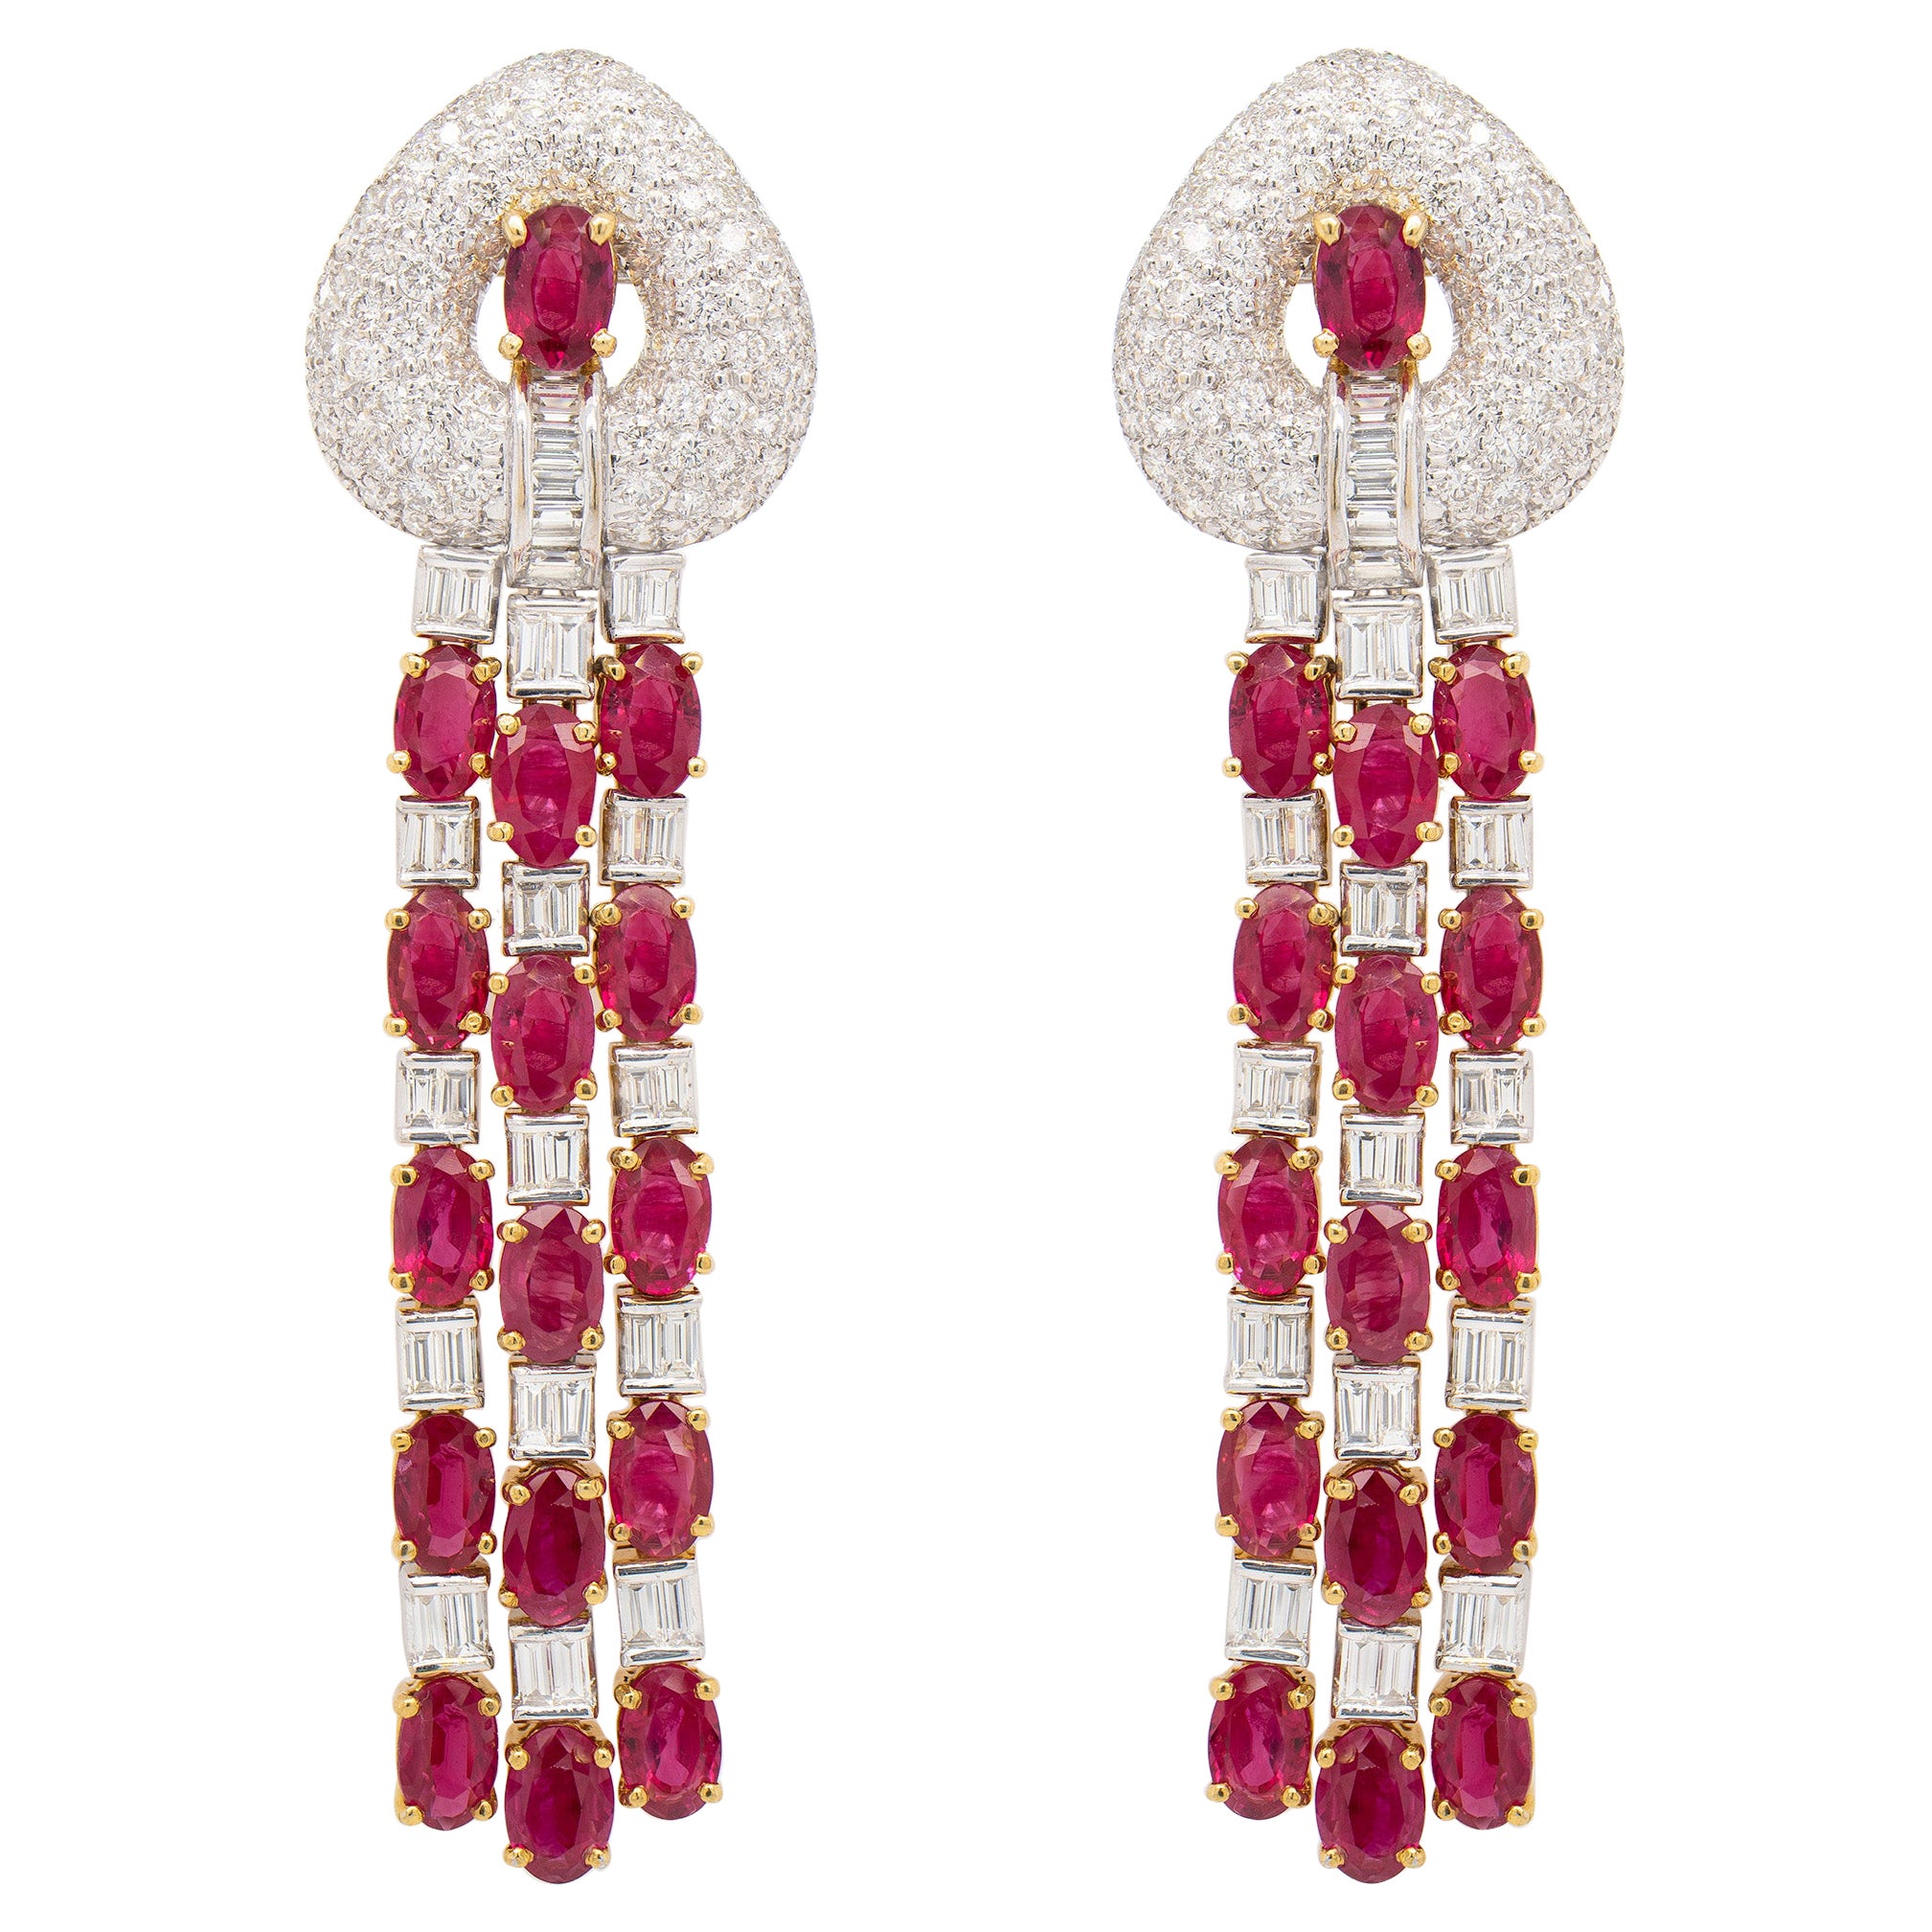 Chandelier Earrings Rubies 14 Carats and Diamonds 5 Carats 18K Gold